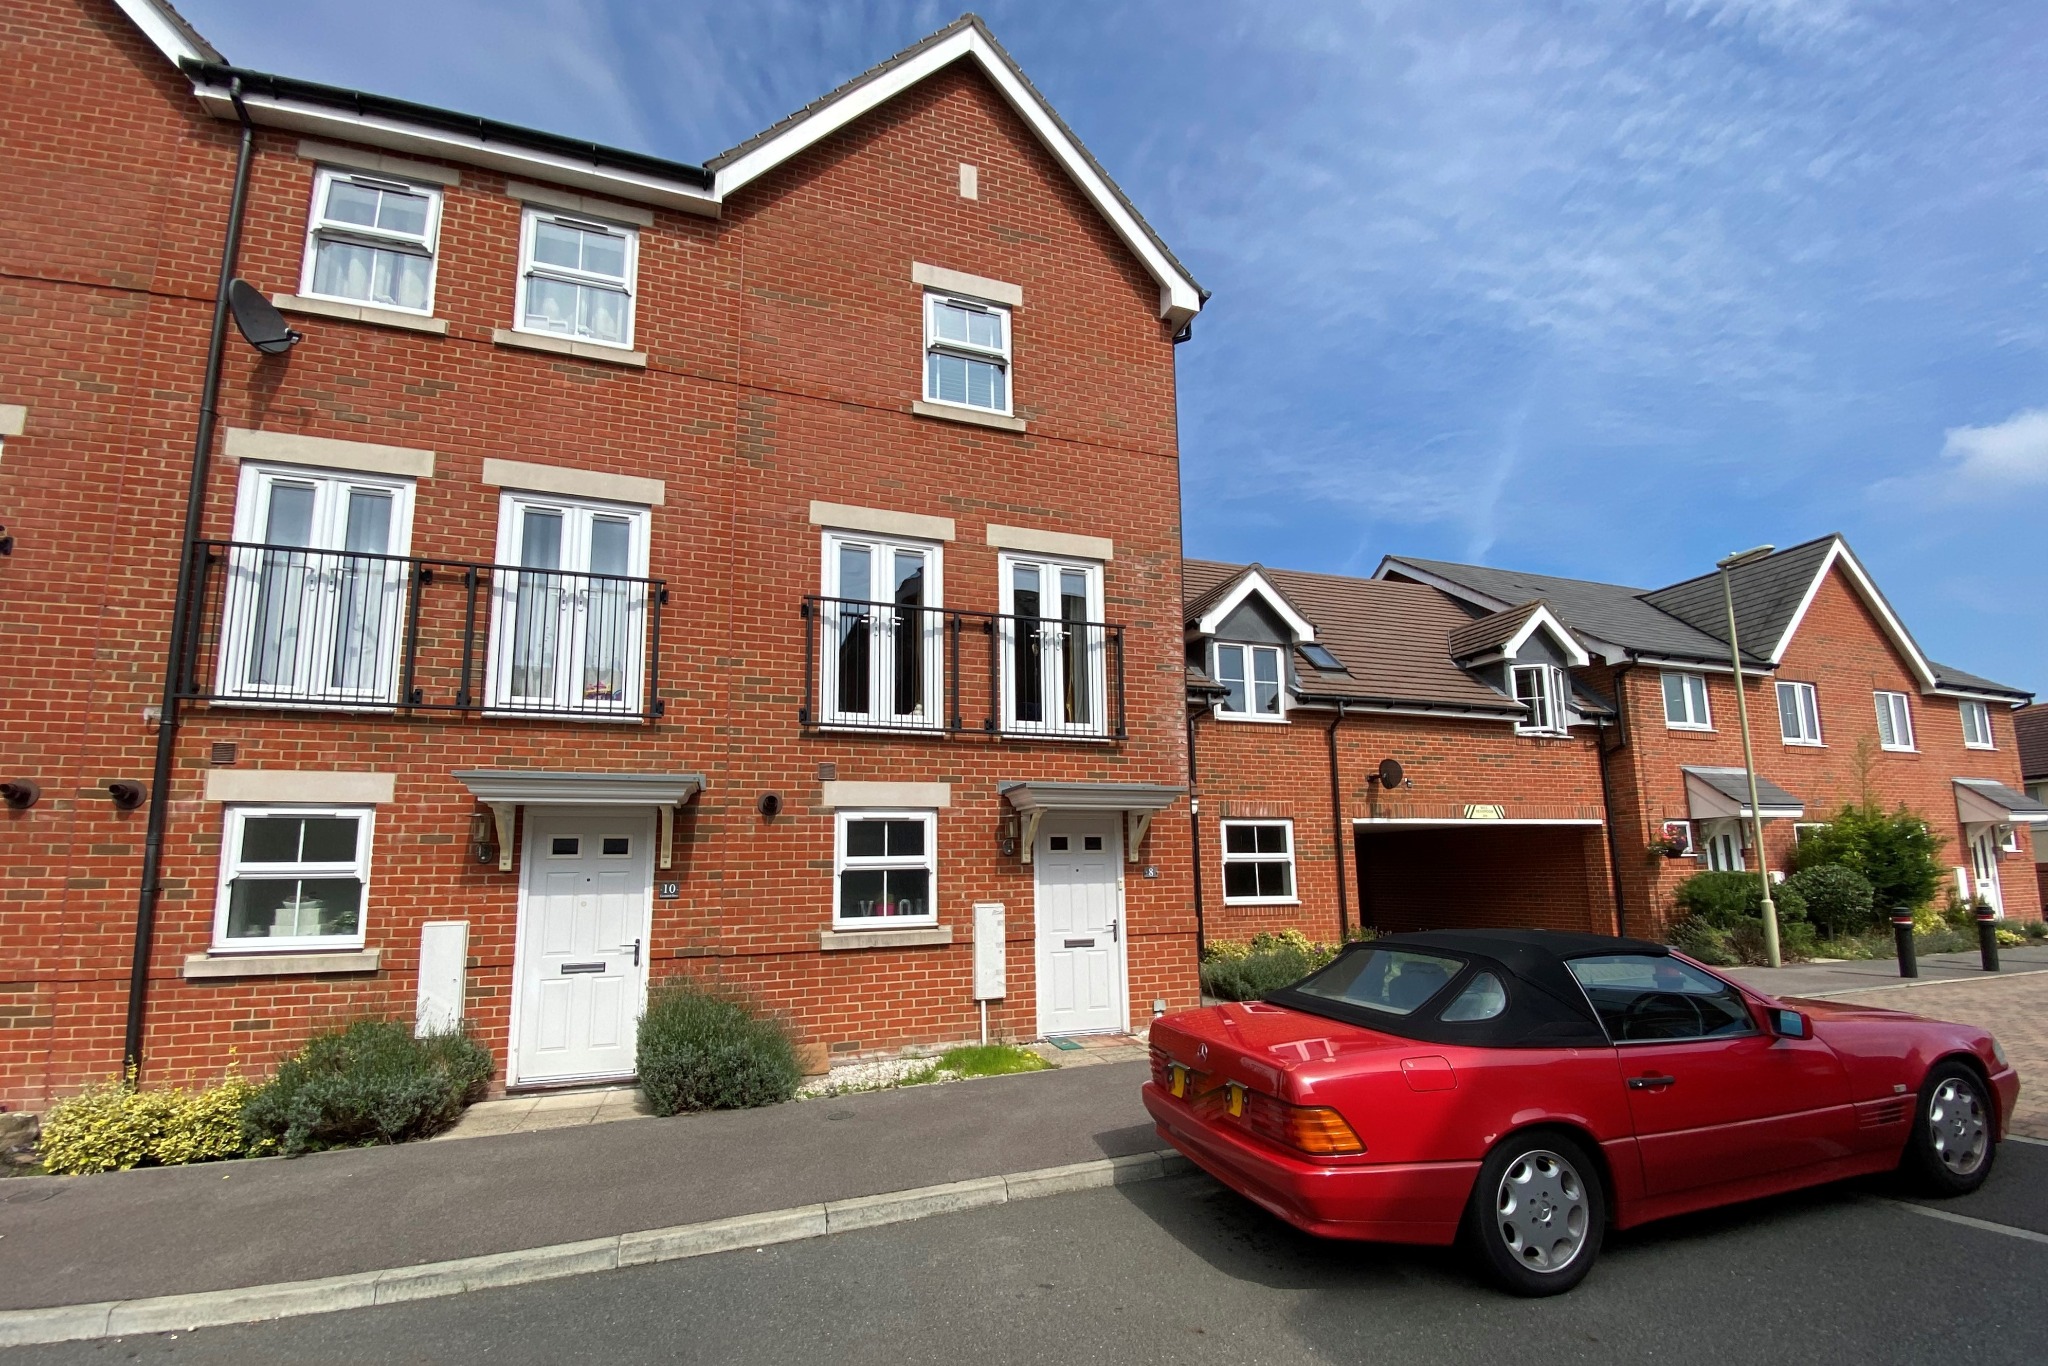 3 bed house for sale in Locks Heath, Southampton - Property Image 1